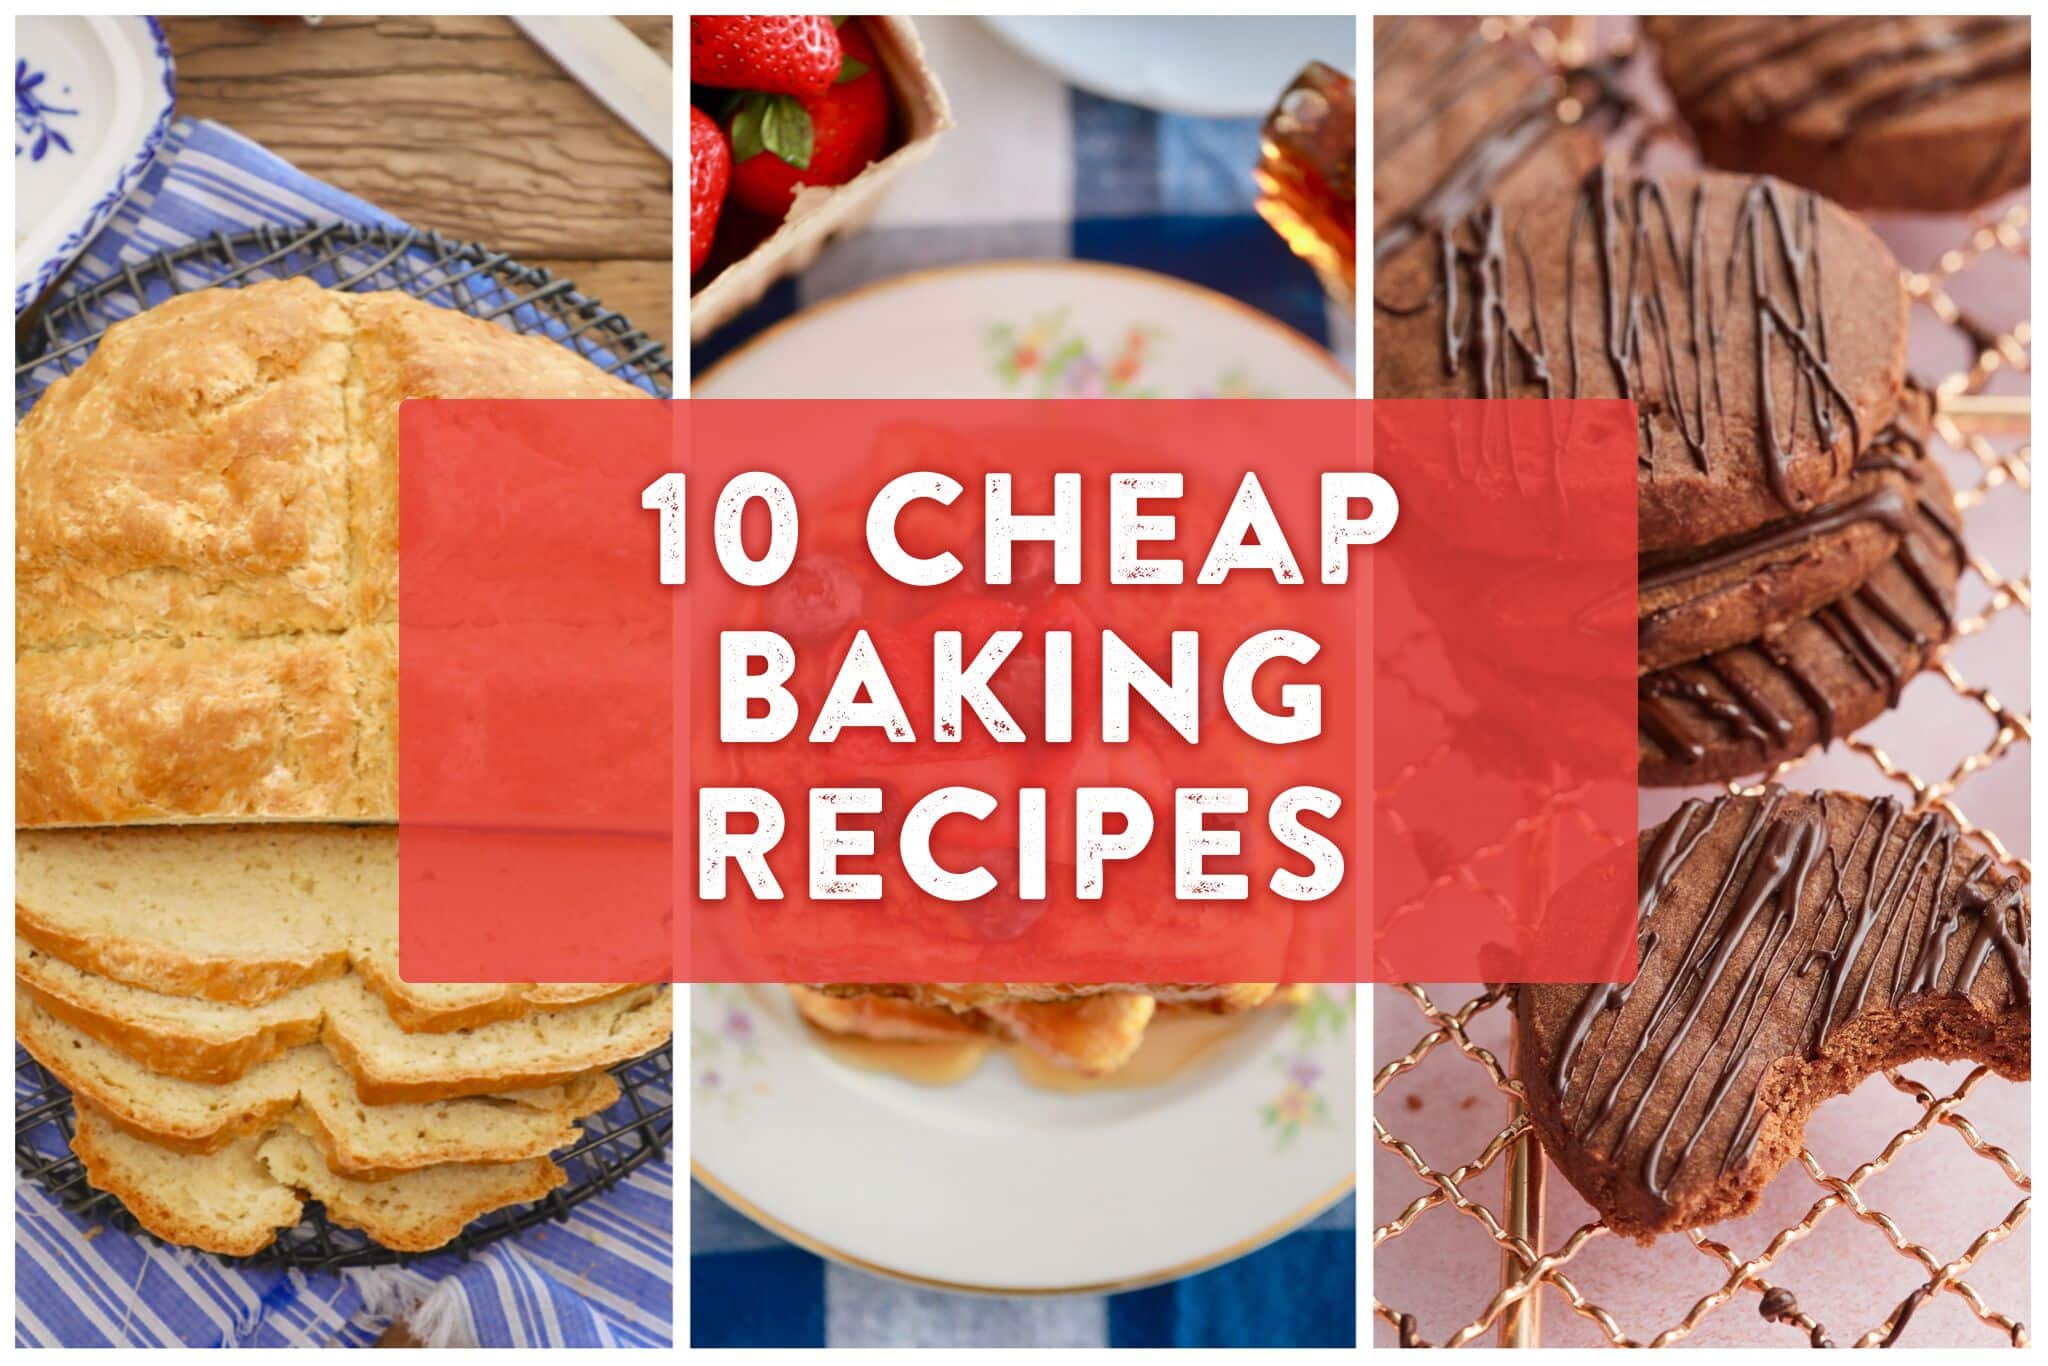 Three photos are presented side-by-side. On the left is Irish Soda BRead, in the middle is a plate of French Toast, and on the right are Chocolate Shortbread Cookies. Over the image, the text reads, "10 Cheap Baking Recipes."